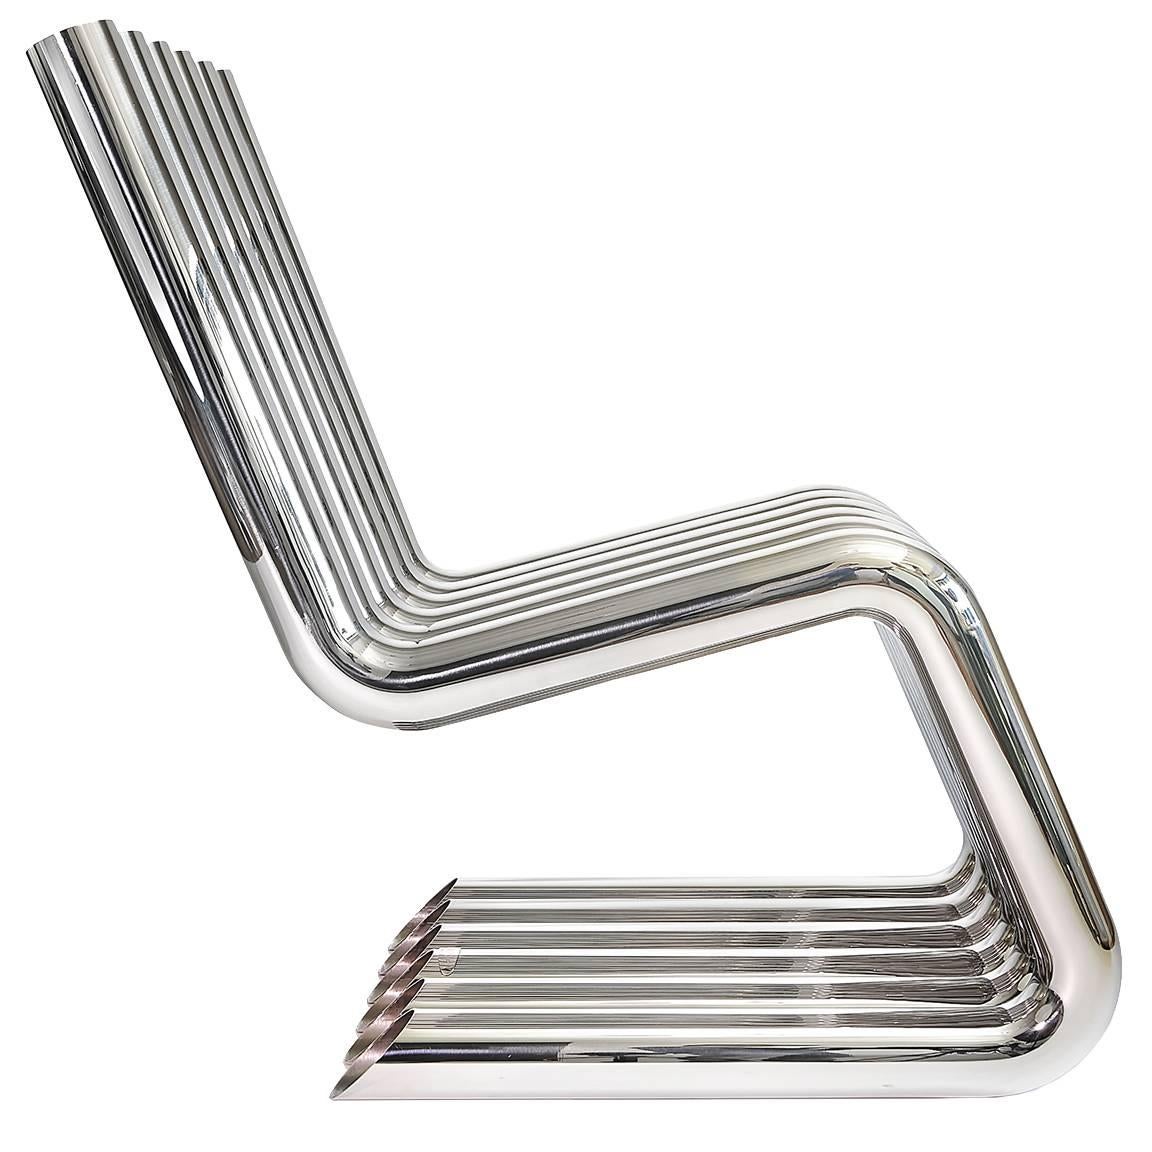 Xosted Lounge Sculptural Chair in Mirror Polished Stainless by Philip Caggiano For Sale